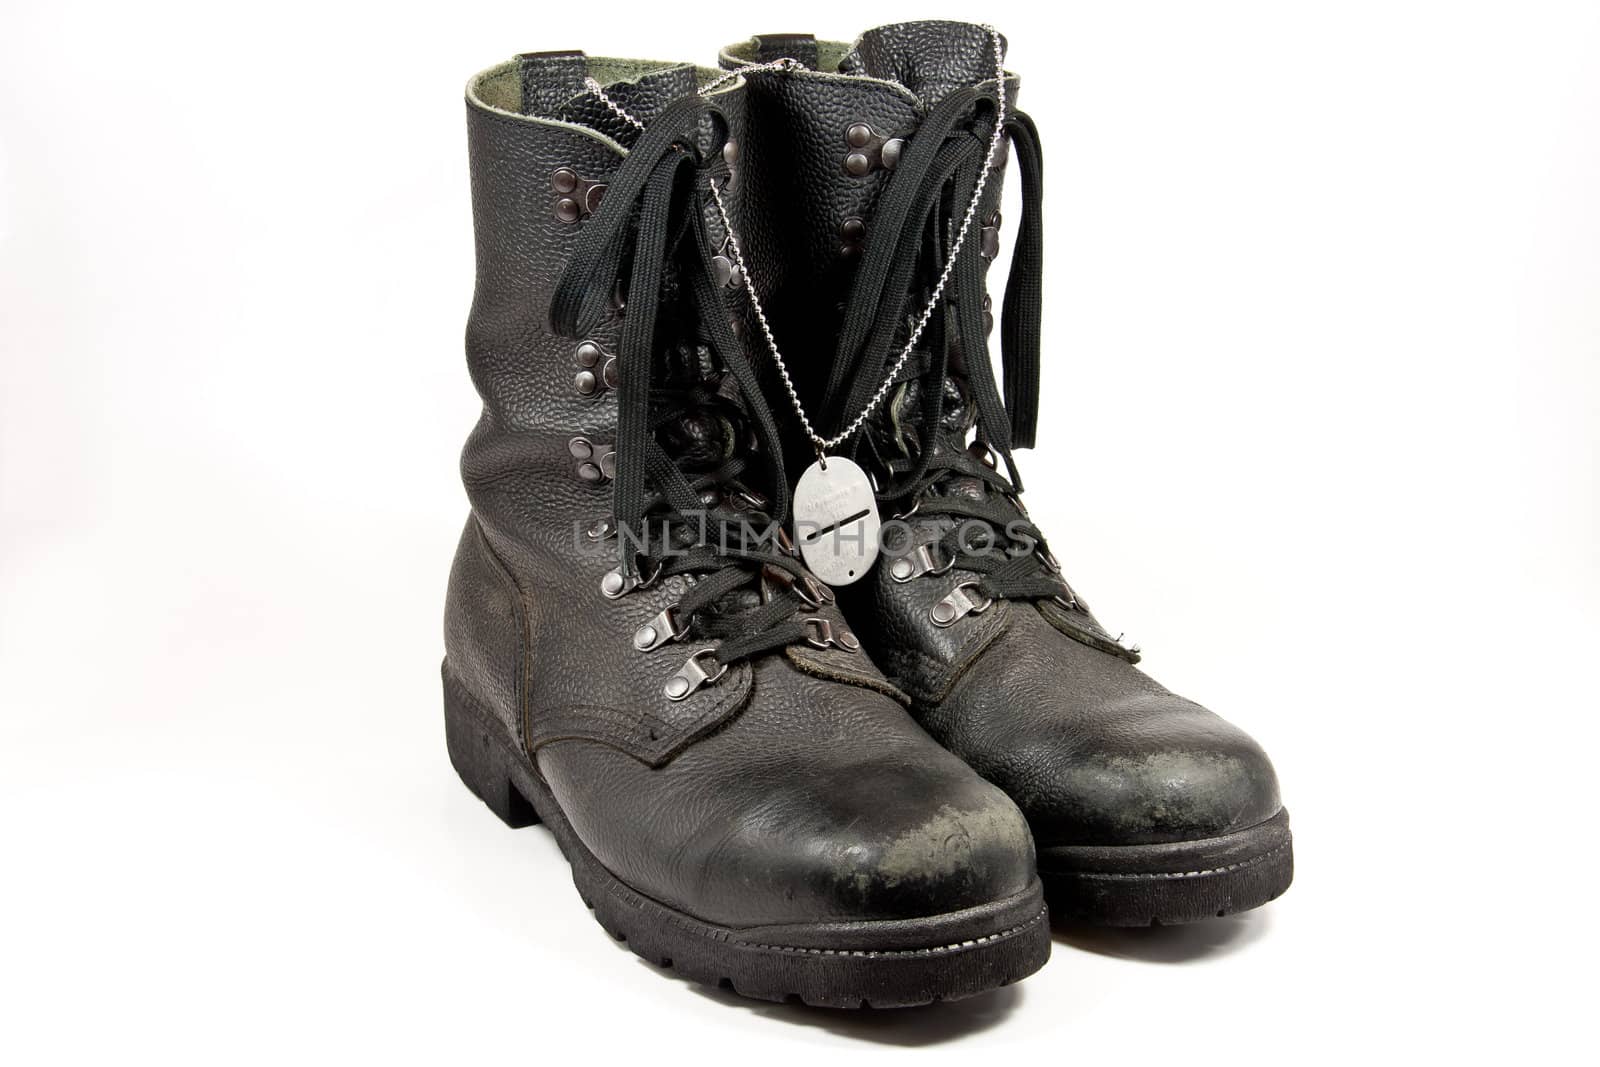 Army boots with dog-tag by Stootsy